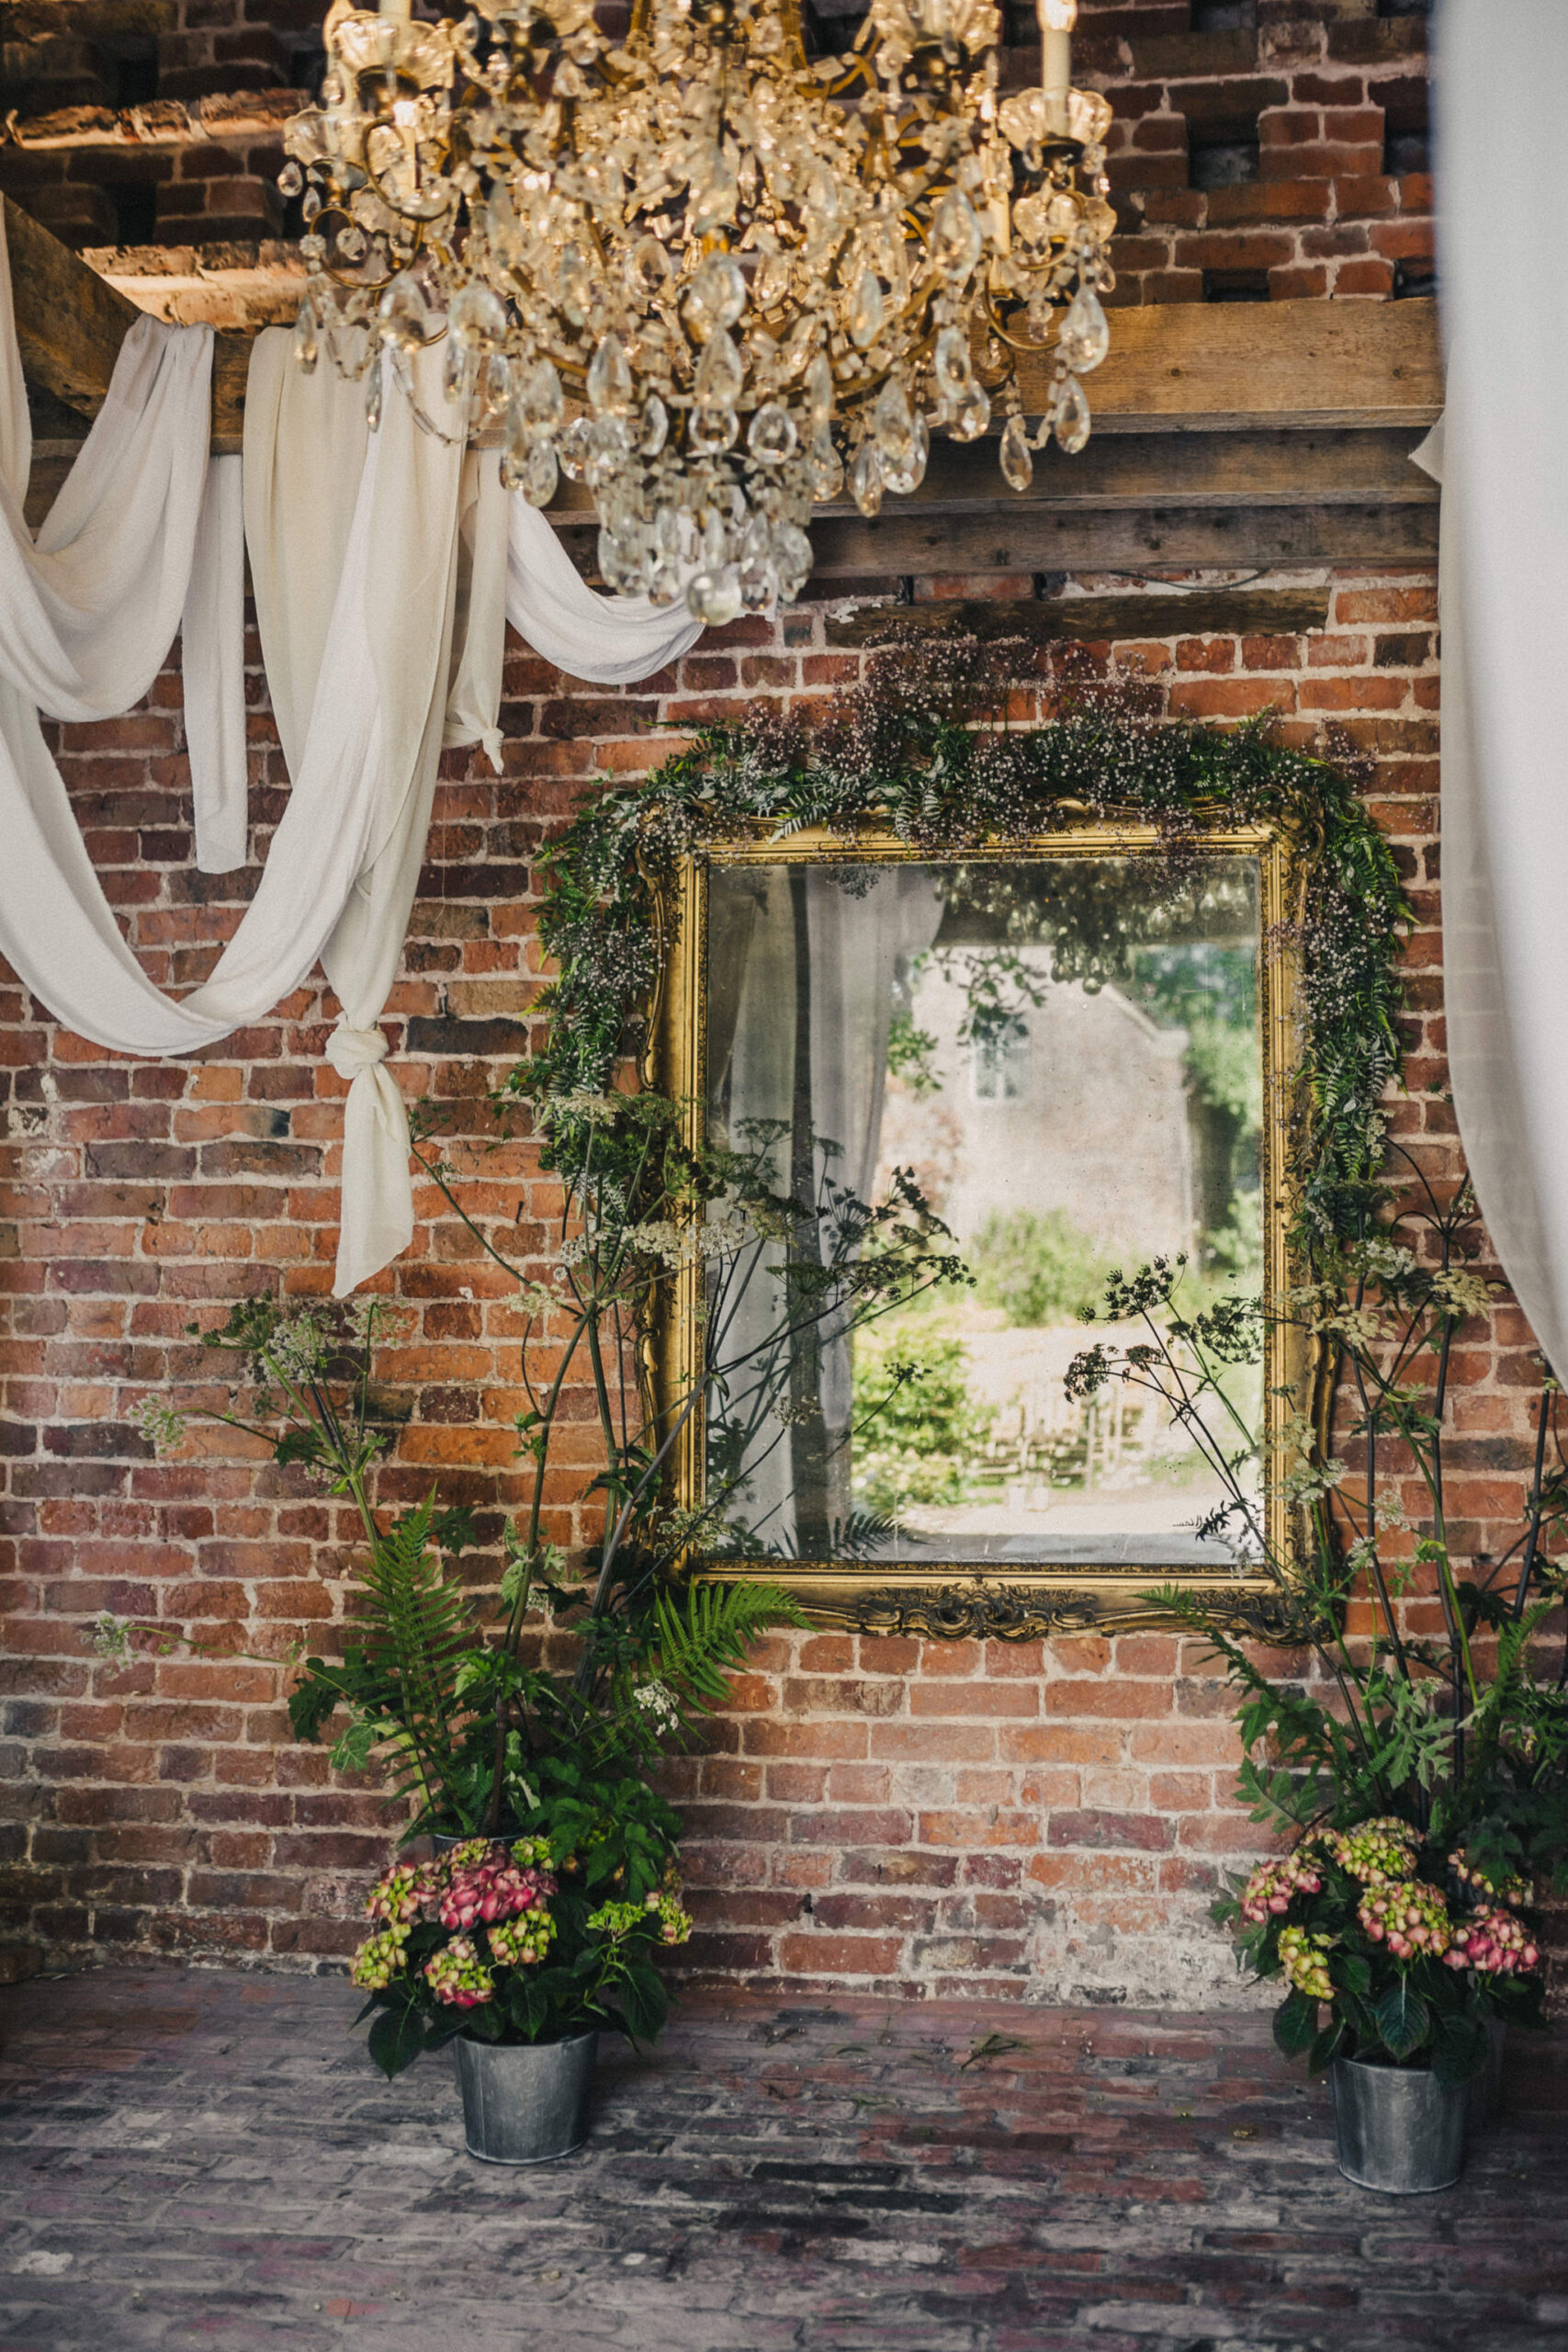 An ornate gold mirror hangs on an exposed brick wall and is surrounded by two floral displays placed on either side of the mirror on the floor